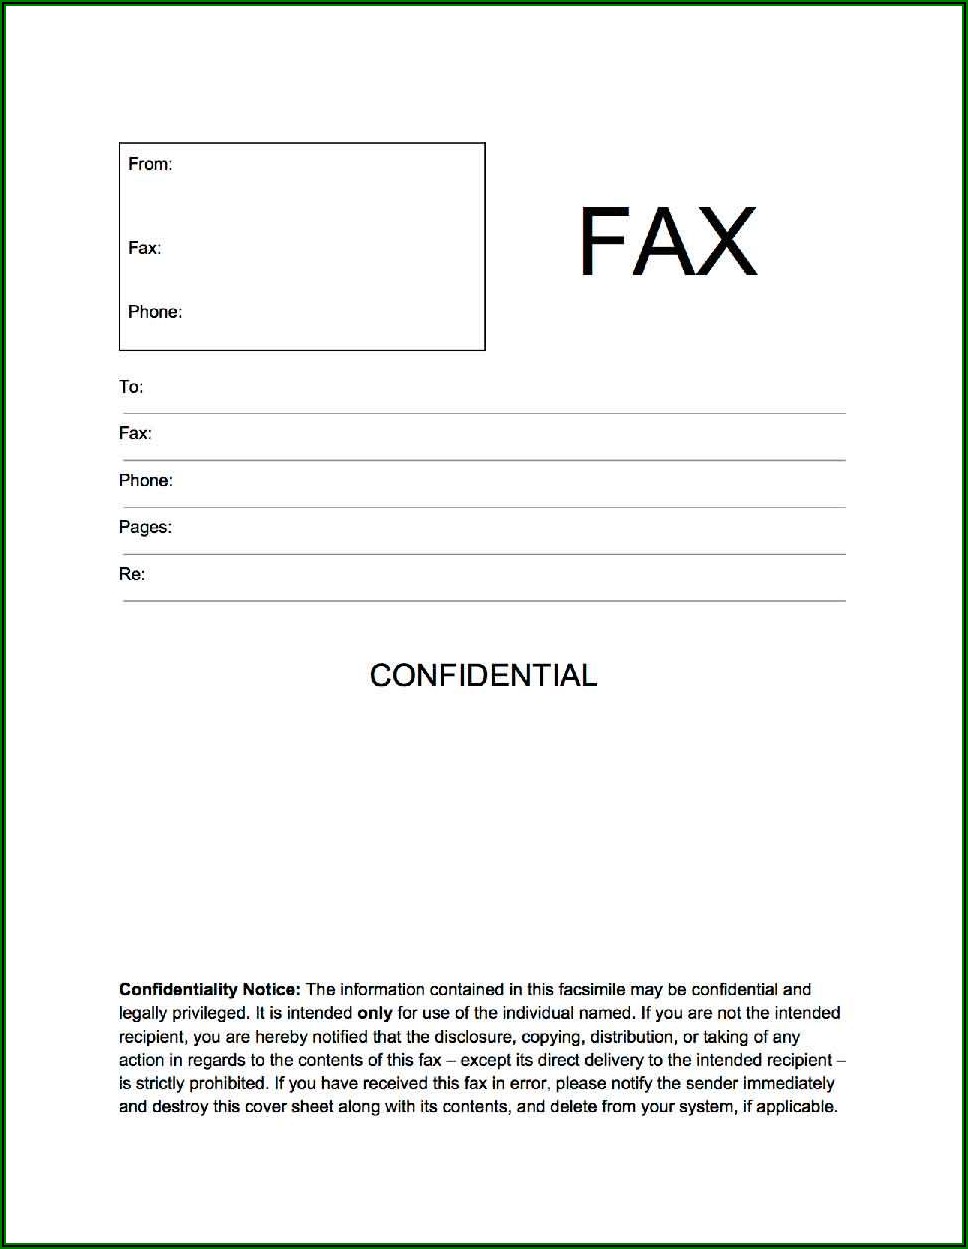 Hipaa Confidentiality Statement For Fax Cover Sheet